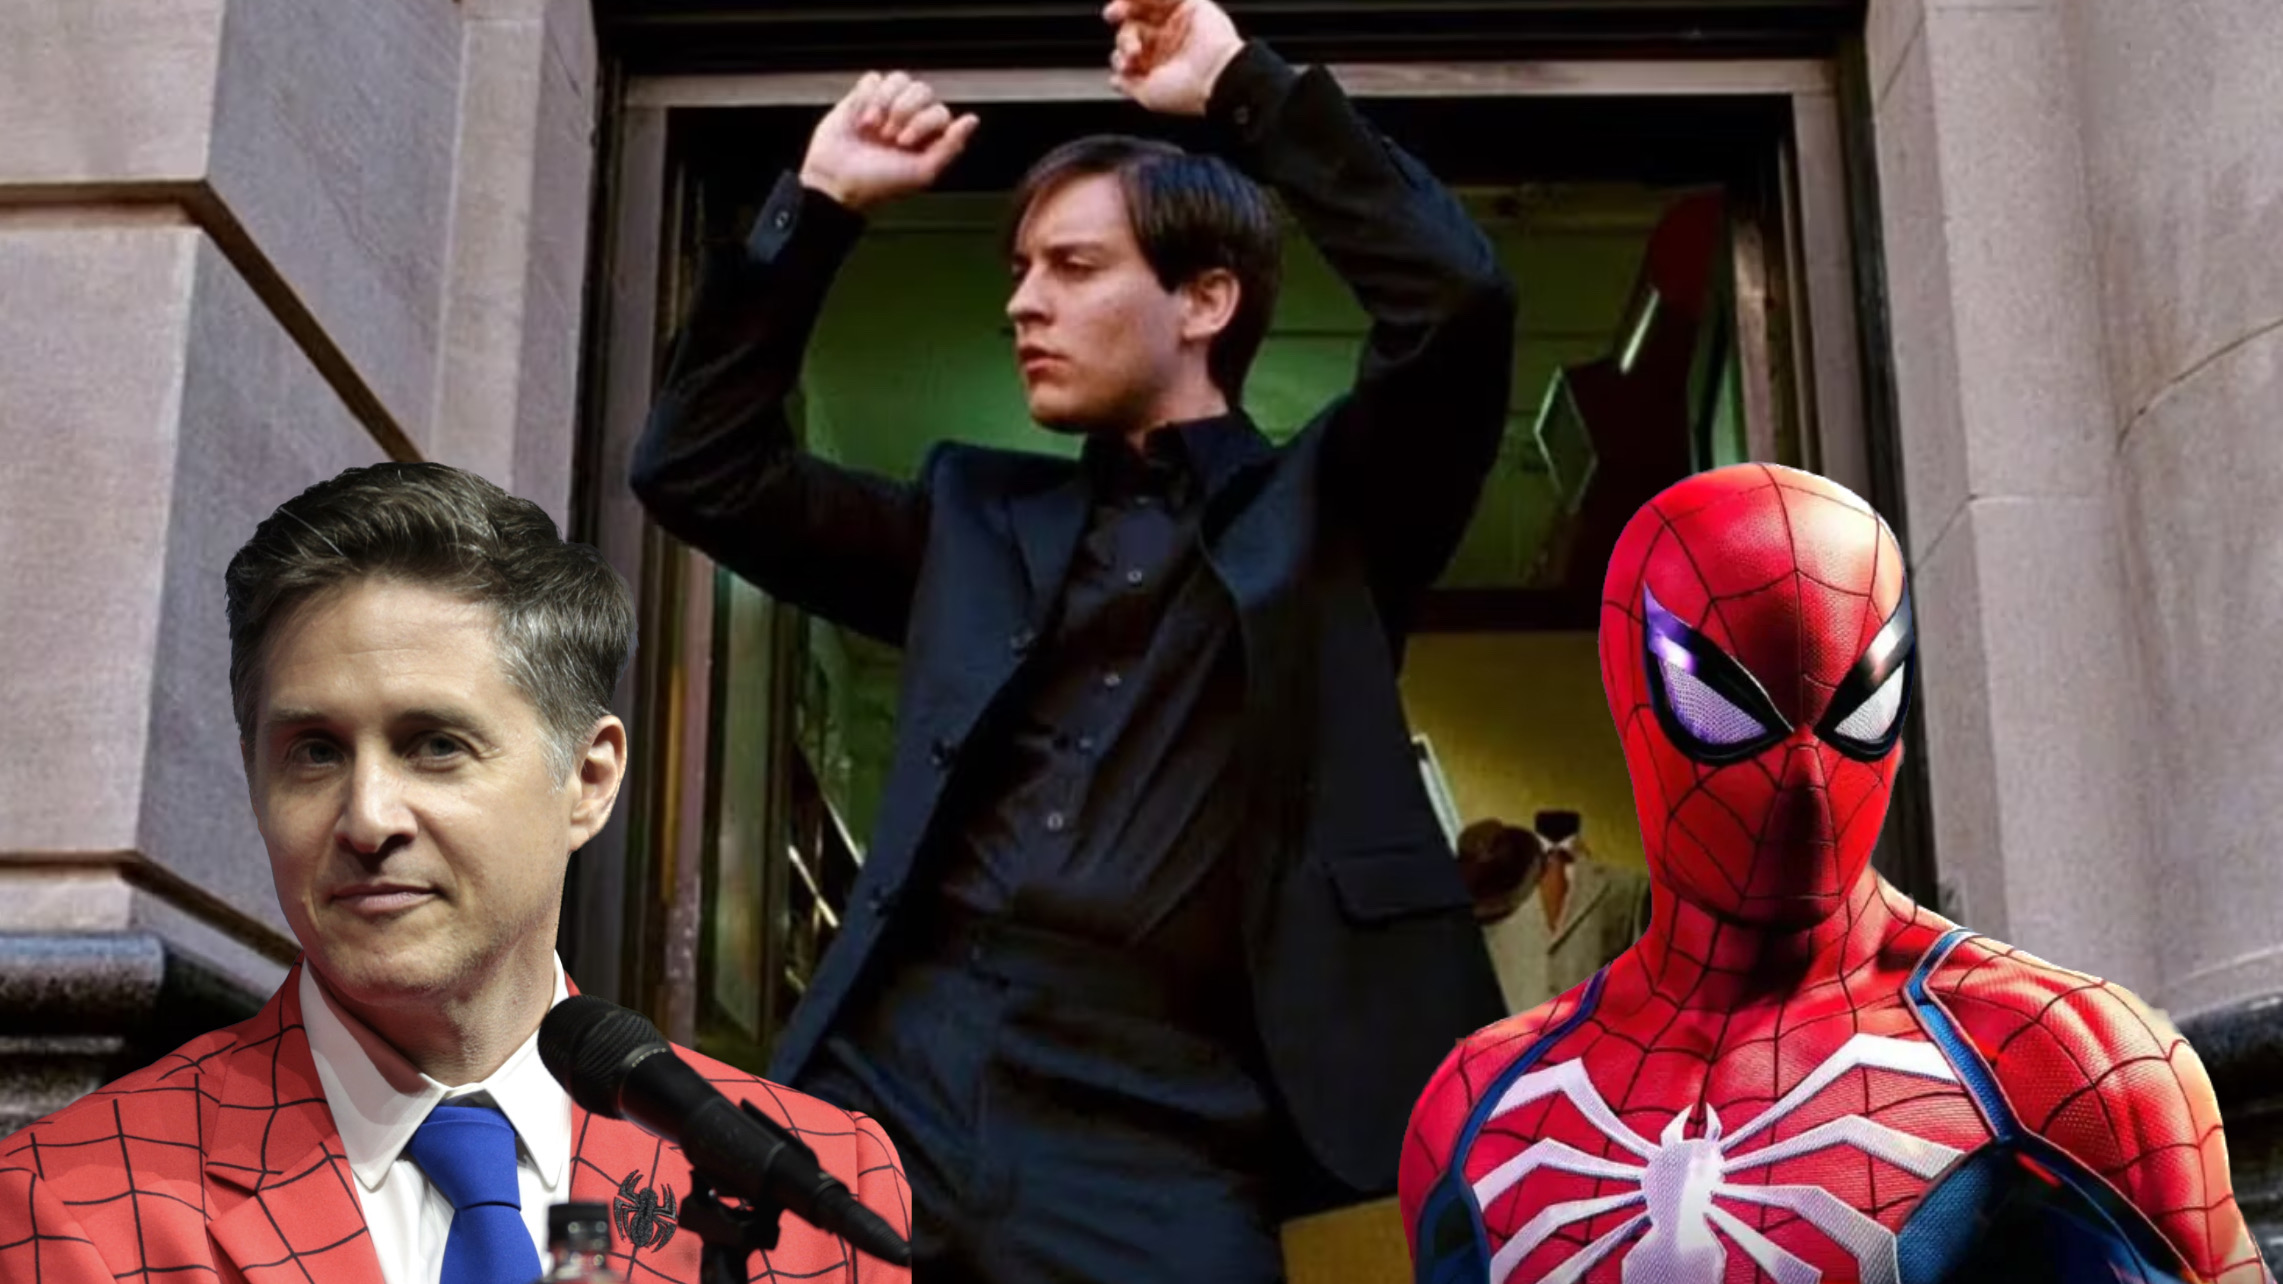 Yuri Lowenthal attore di Peter Parker in Marvel's Spider-Man 2 insieme a Tobey Maguire in Spider-Man 3